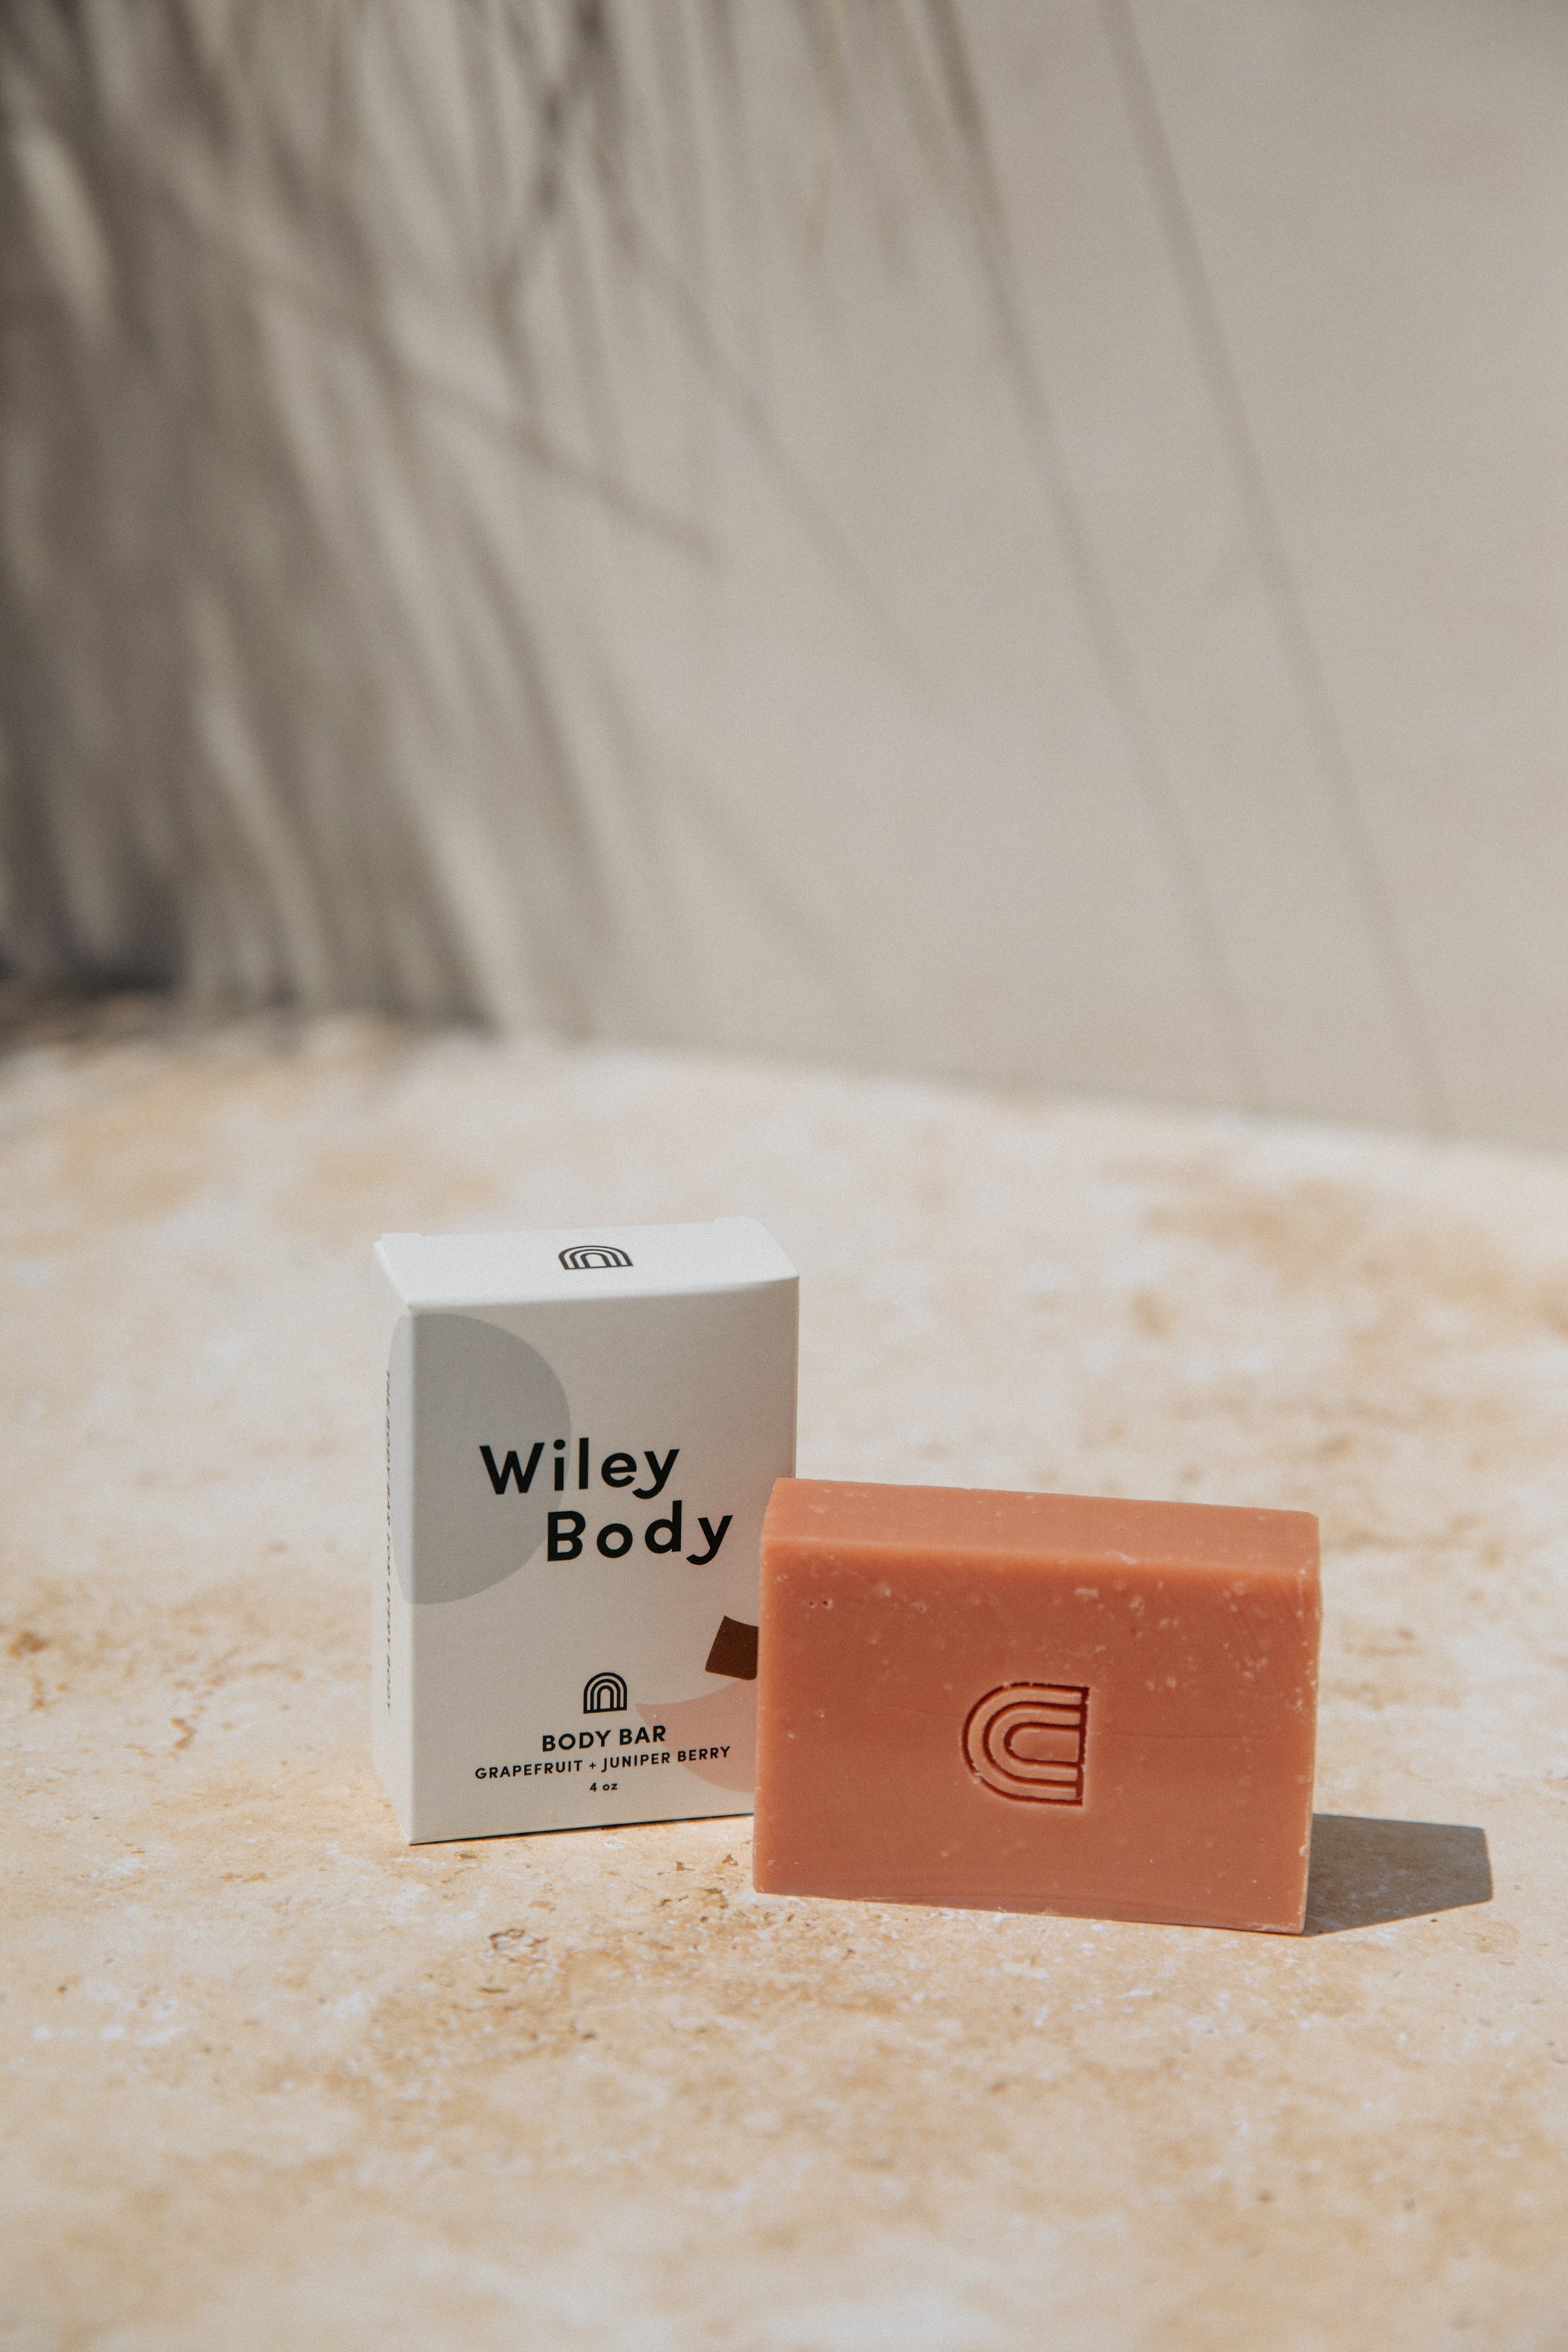 A small soap box that reads "Body Bar" next to a soap bar on it's side